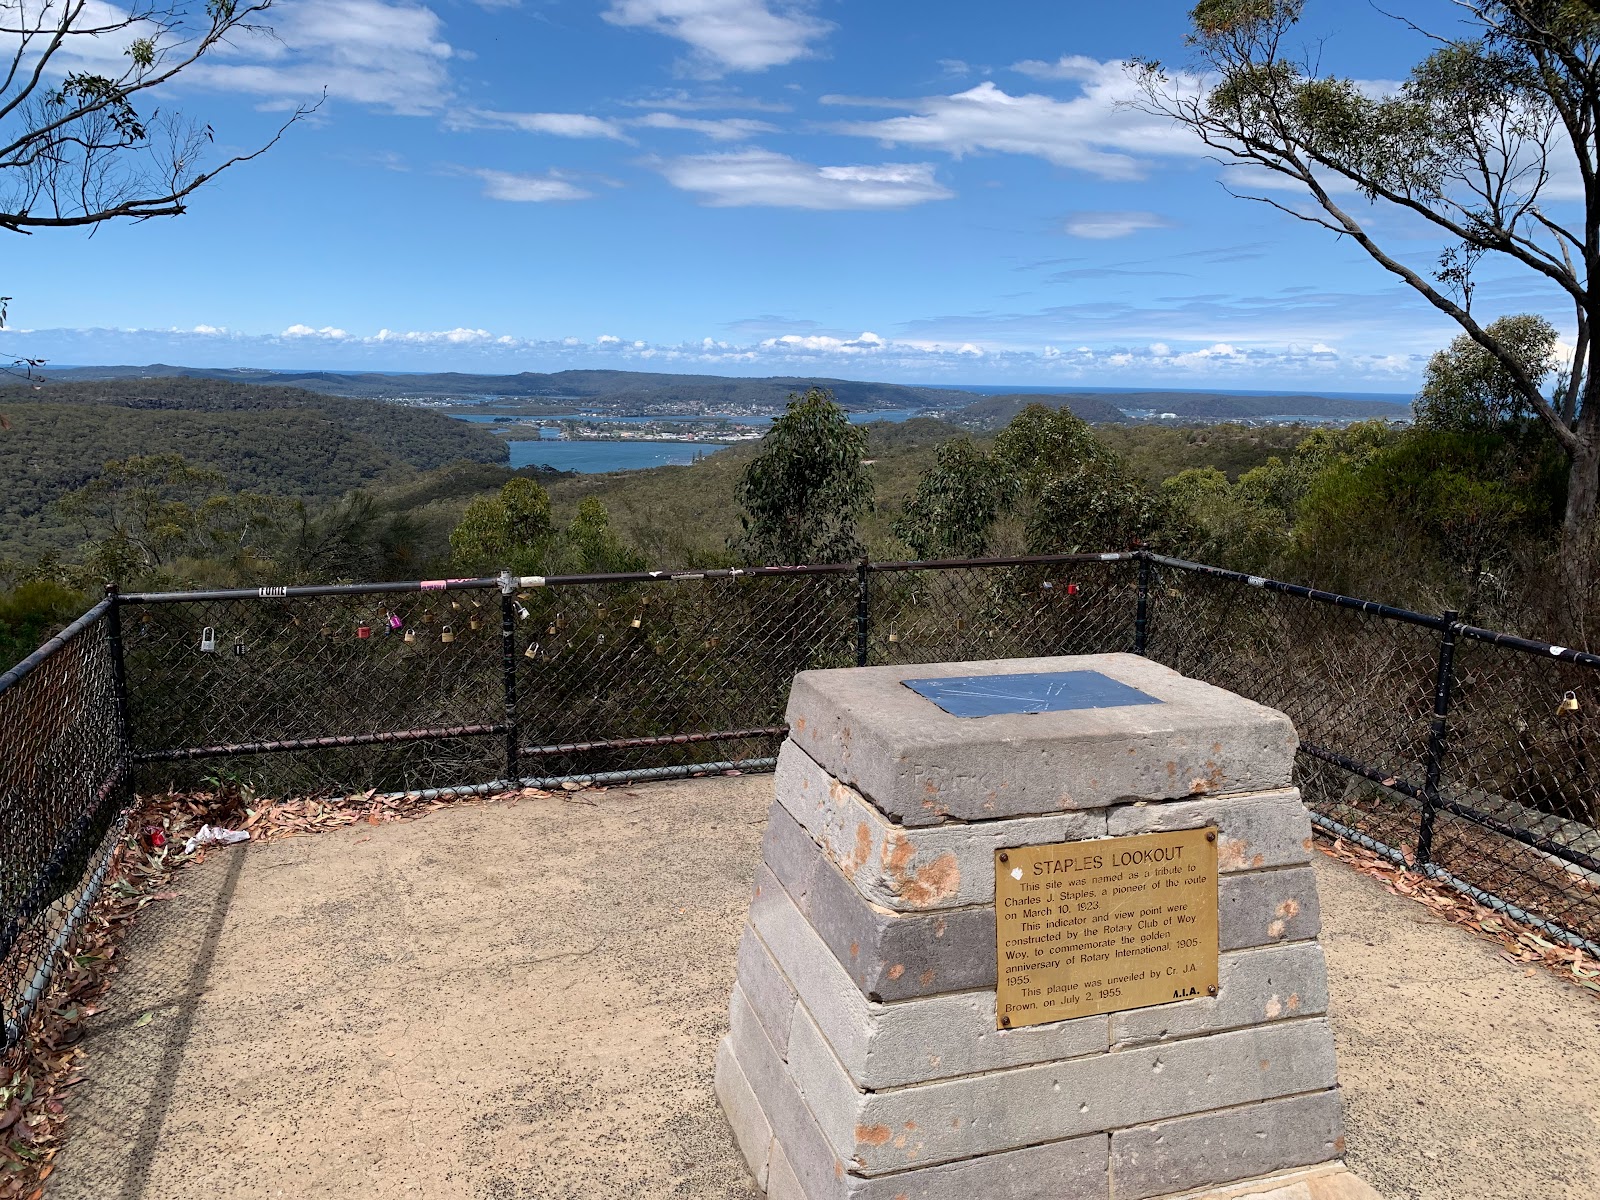 Staples Lookout